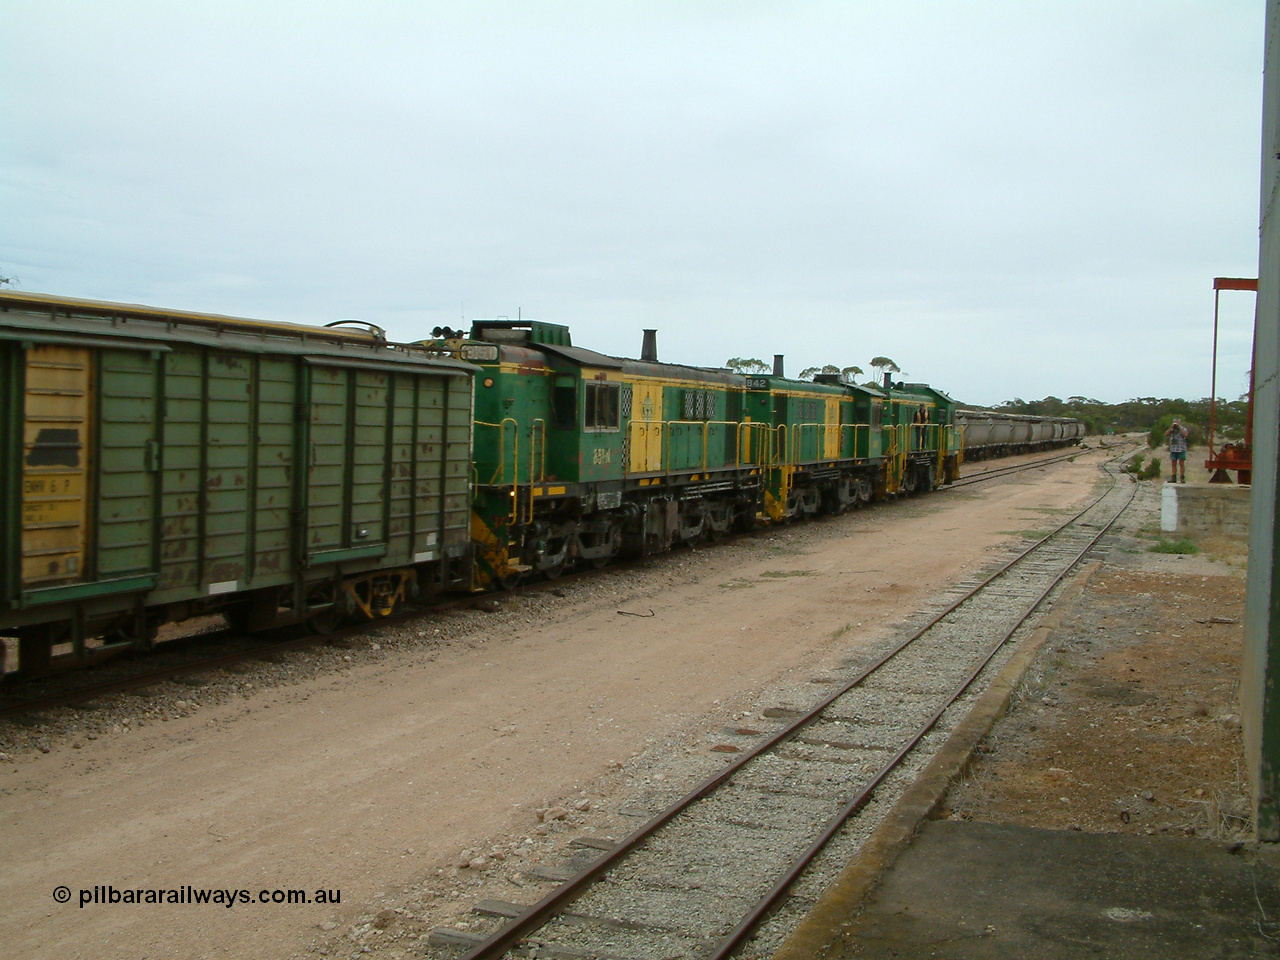 030407 114350
Poochera, empty grain train arrives behind a trio of former Australian National Co-Co locomotives with rebuilt former AE Goodwin ALCo model DL531 830 class ex 839, serial no. 83730, rebuilt by Port Augusta Workshops to DA class, DA 4 leading two AE Goodwin ALCo model DL531 830 class units 842, serial no. 84140 and 851 serial no. 84137, 851 having been on the Eyre Peninsula since delivered in 1962, to shunt off empty waggons and pick up the loaded ones. 7th April 2003.
Keywords: 830-class;851;84137;AE-Goodwin;ALCo;DL531;